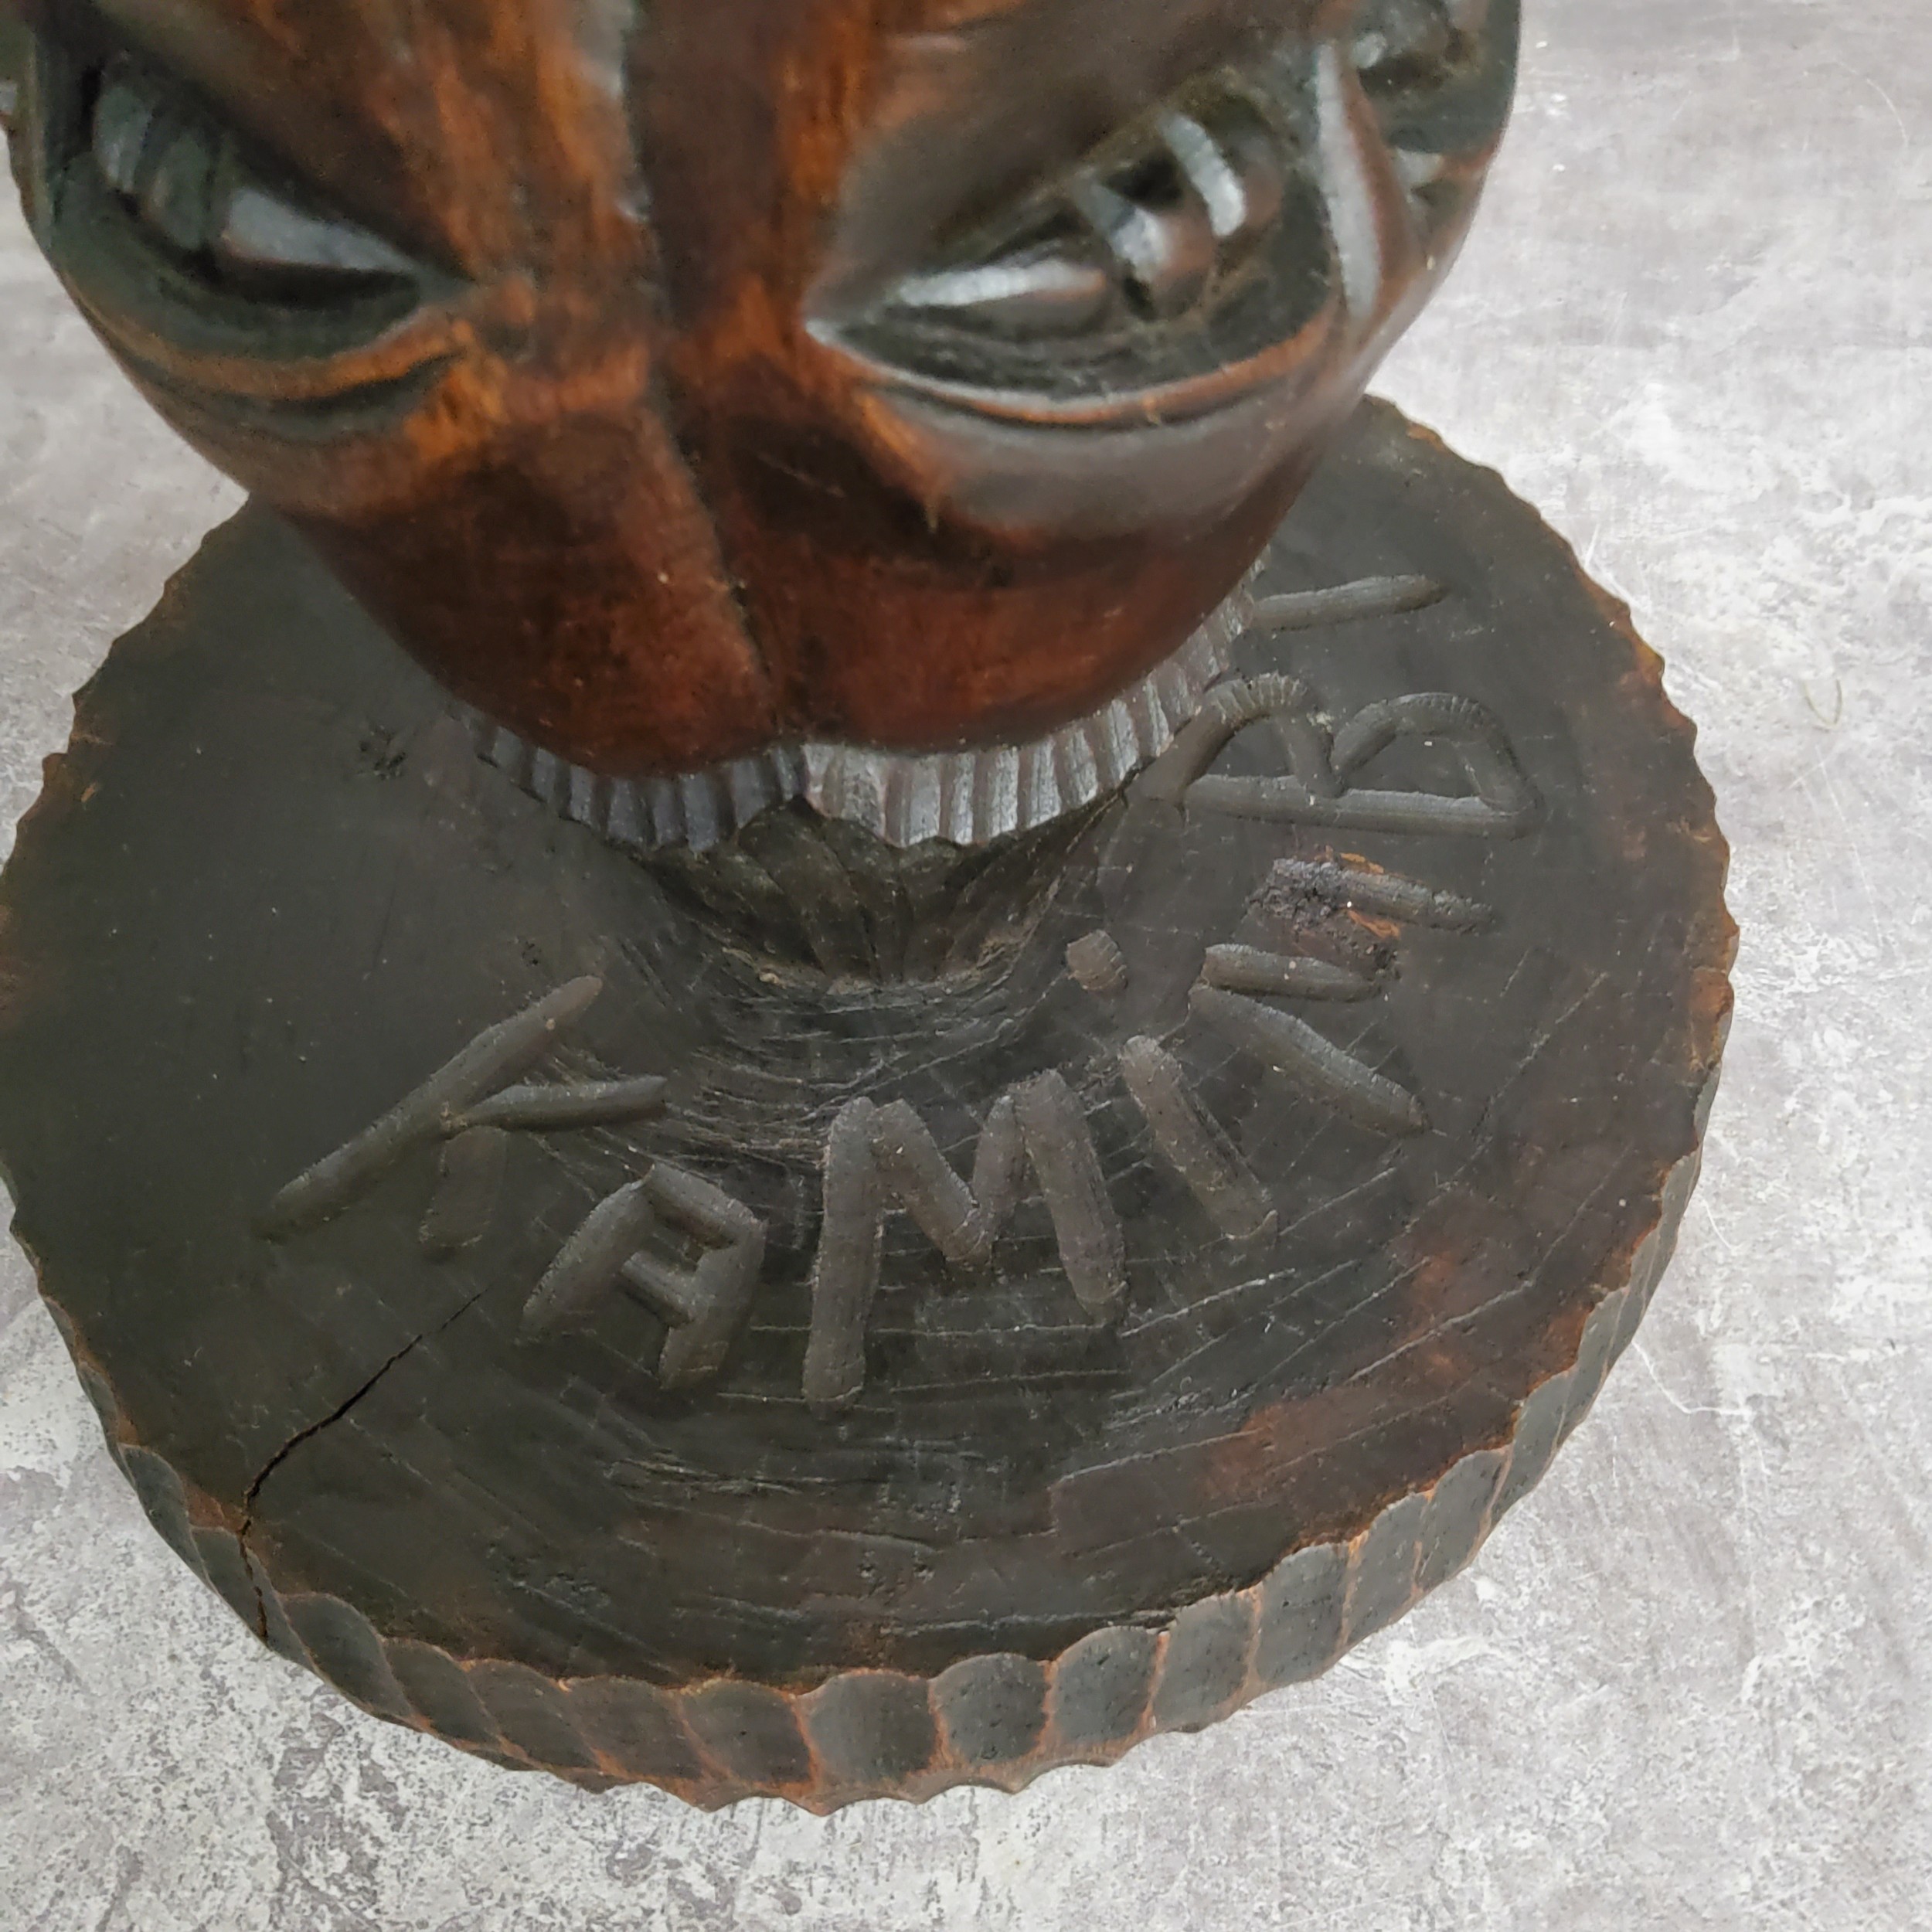 Tribal - A Democratic Republic of the Congo, African stool, signed Kamimbi 36cm high - Image 2 of 3